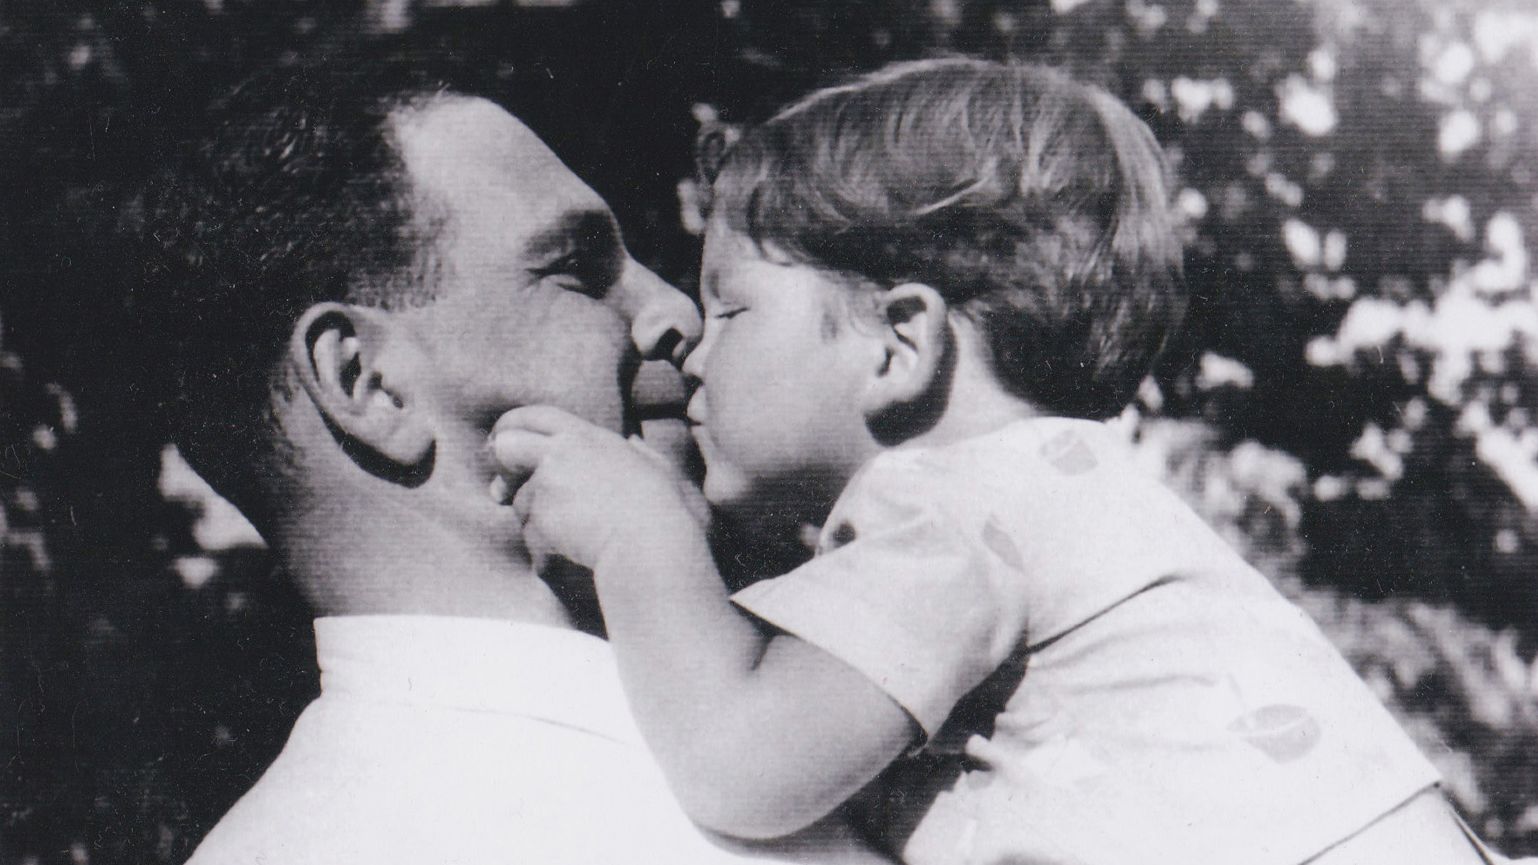 John with his father just before World War II. His father was was killed in 1944 by Hungarian Nazis when John was 6.